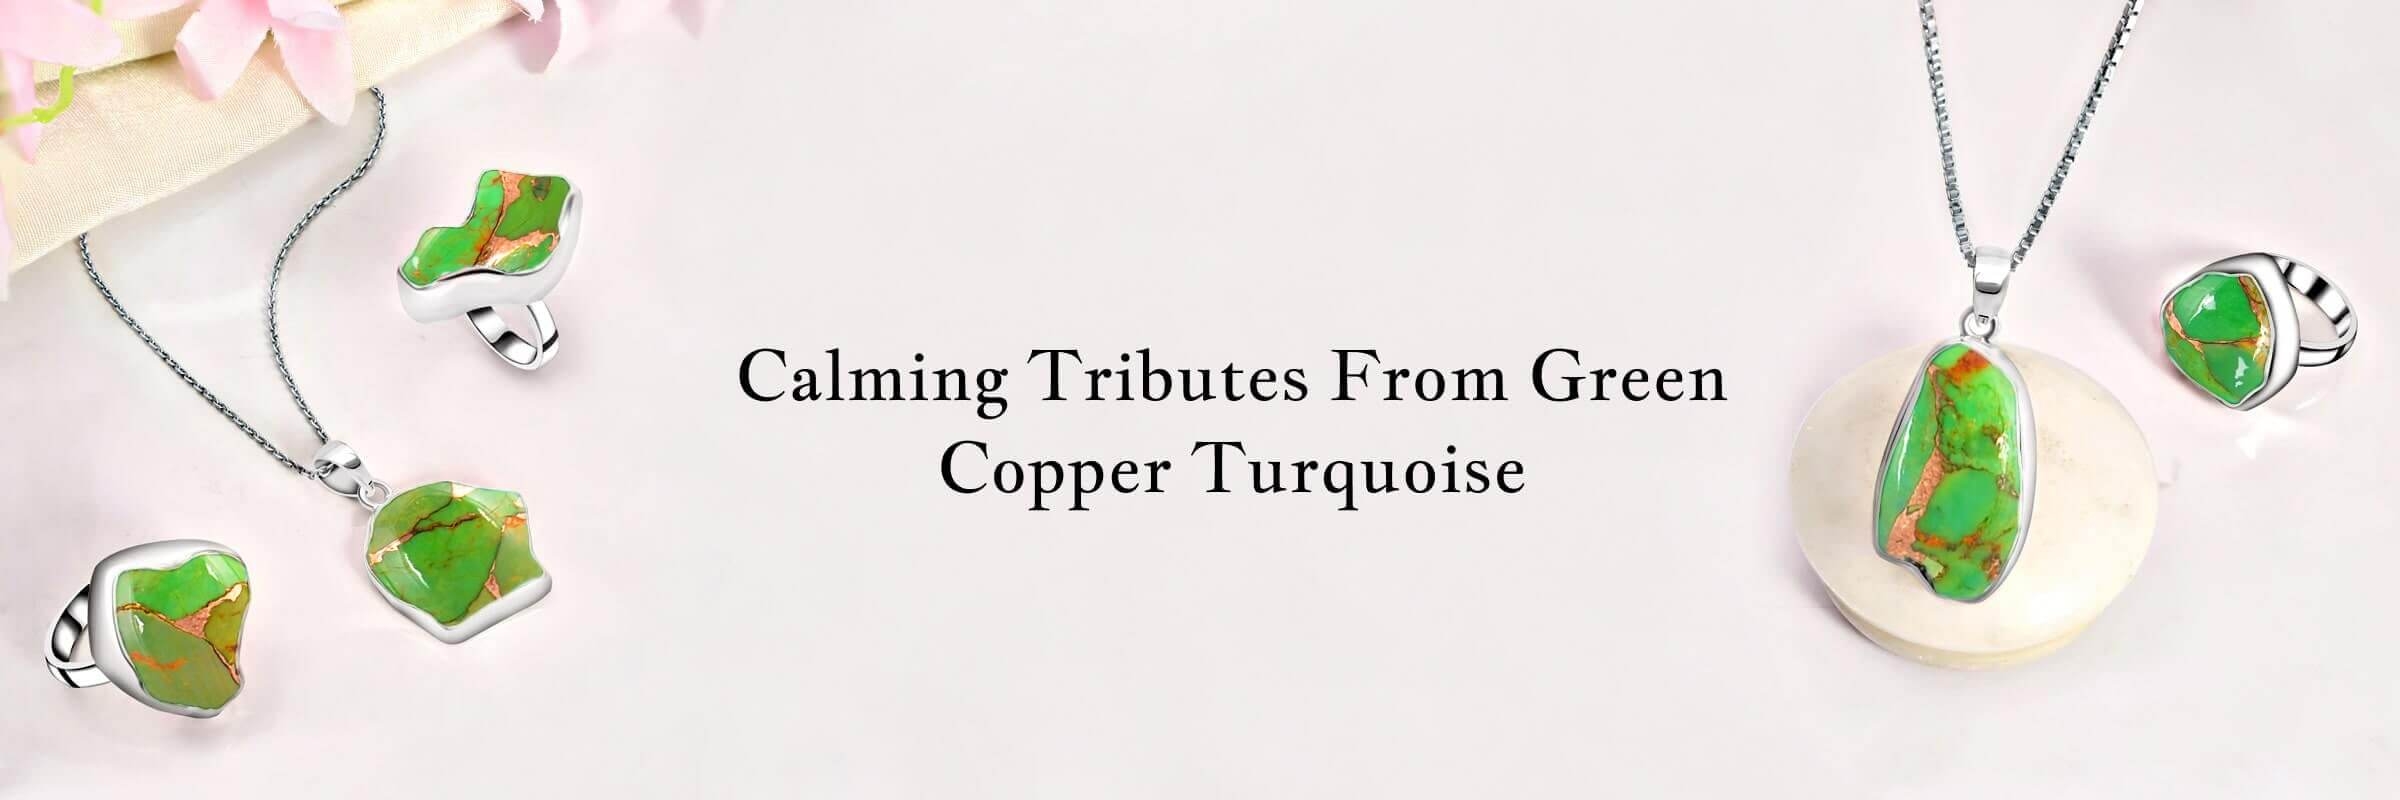 Attributes of Green Copper Turquoise